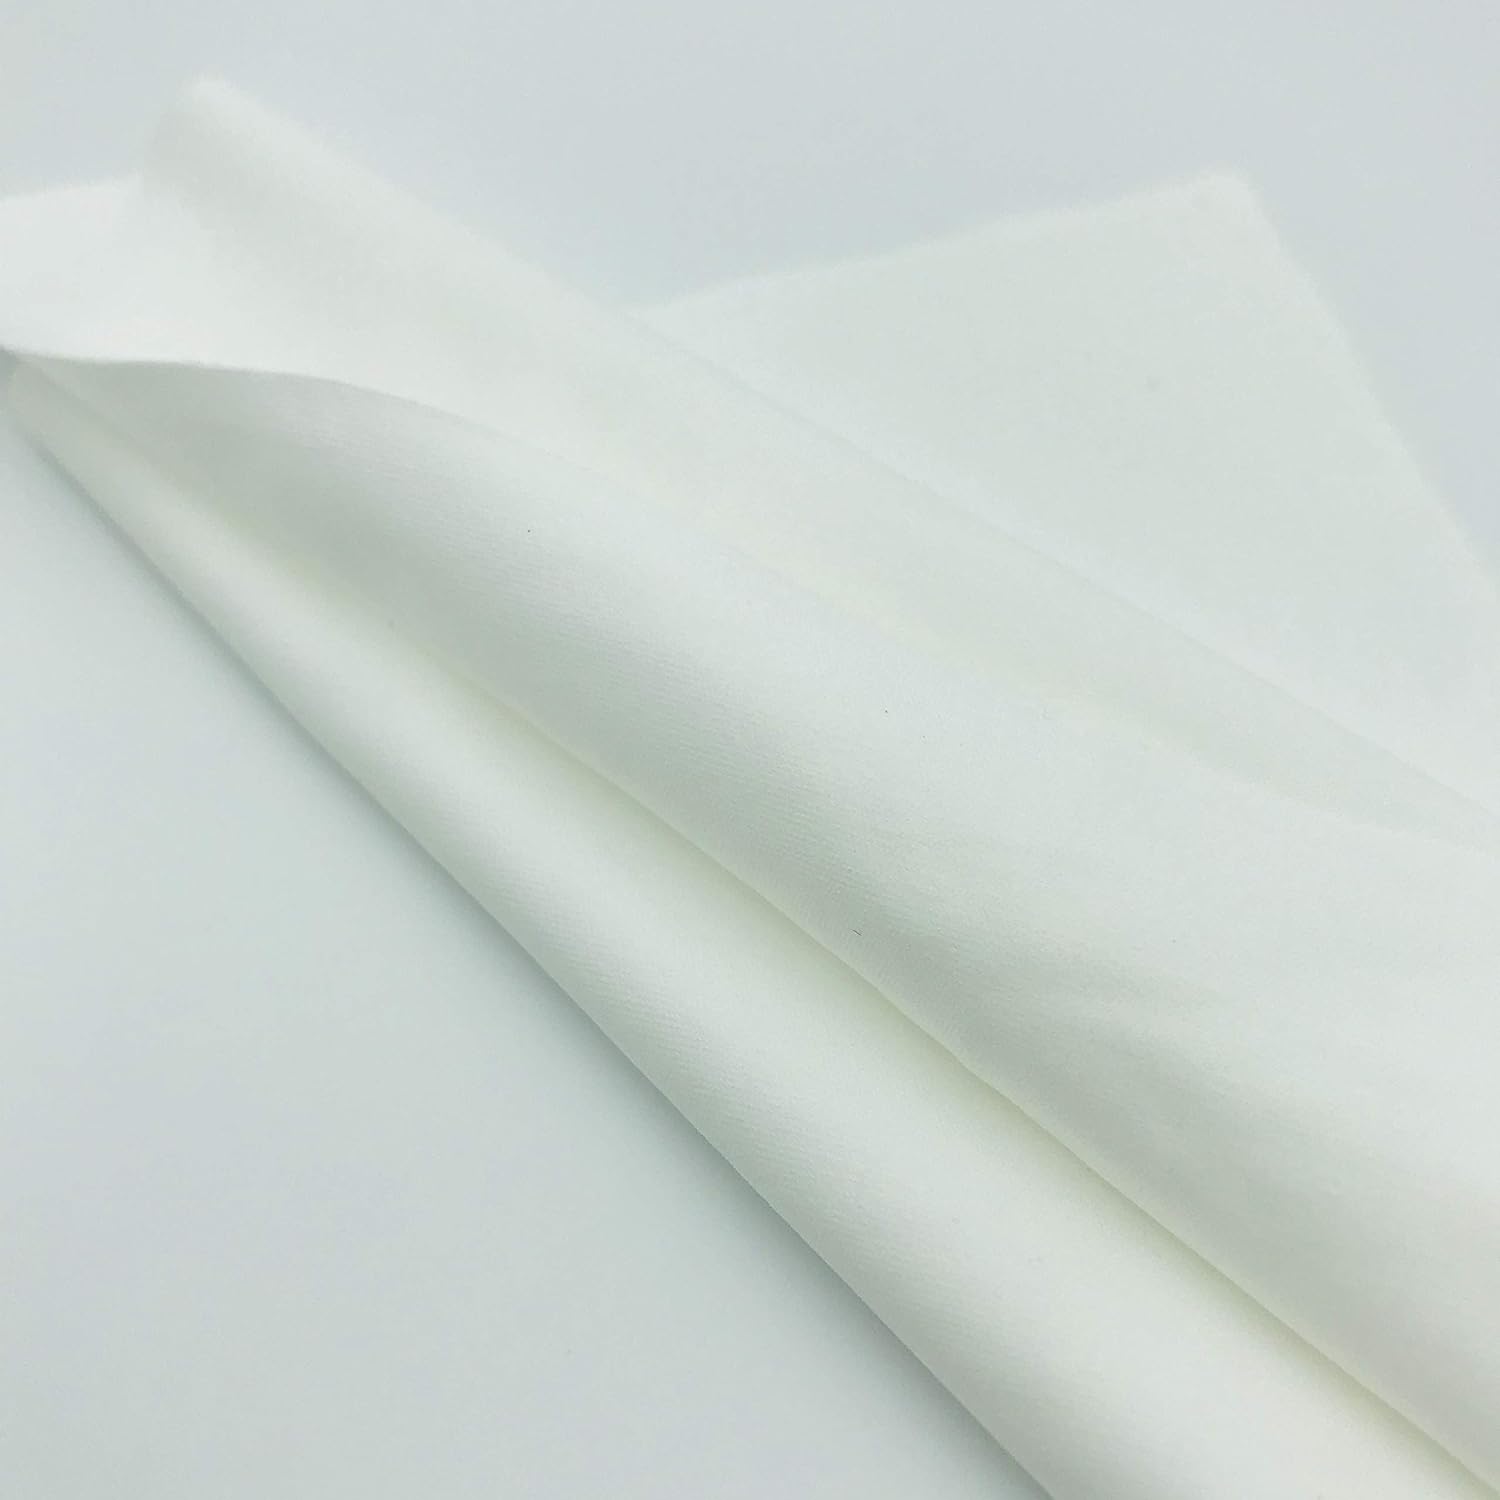 Cleanroom Wipes High-Density Polyester 4" x 4" Multipurpose Cloth for Automotive, and Laboratory: Ideal for Precision Instruments and Sensitive Components. 8,000 wipes/box, 20 bags (No. CP12004).